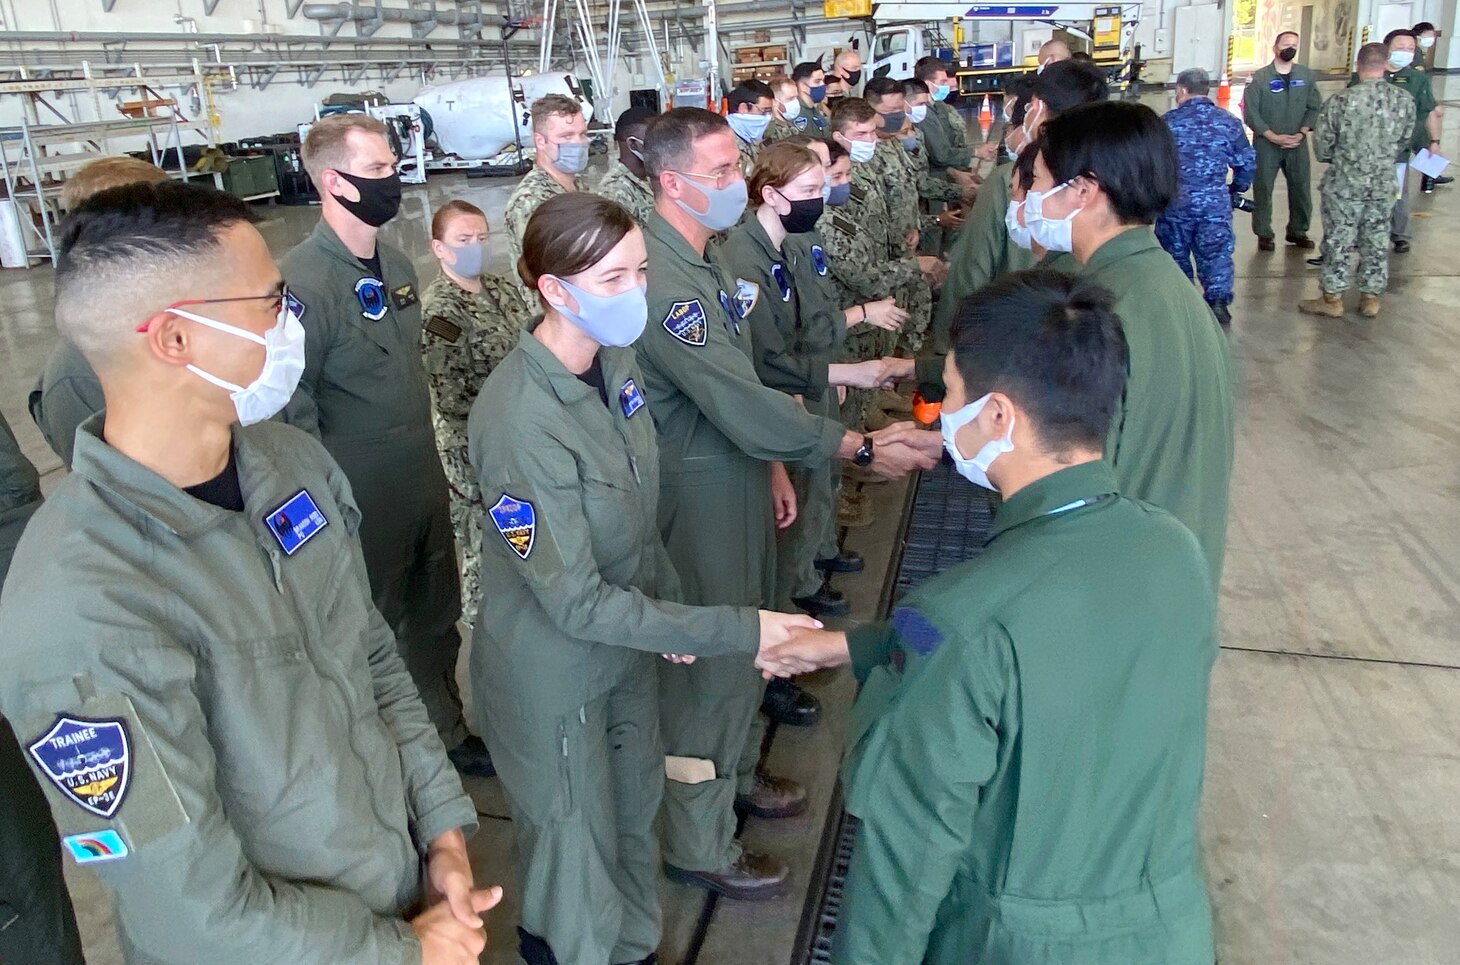 KADENA AIR BASE, Japan (Sept. 21, 2022) – Visiting members of Japan Maritime Self-Defense Force Air Reconnaissance Squadron (VQ) 81 greet Fleet Air Reconnaissance Squadron (VQ) 1 during Raijin 22-2, an annual unit exchange. Based out of Whidbey Island, Washington, the VQ-1 “World Watchers” are currently operating from Kadena Air Base in Okinawa, Japan. The squadron conducts naval operations as part of a rotational deployment to the U.S. 7th Fleet area of operations. (U.S. Navy photo by Mass Communication Specialist First Class Glenn Slaughter)